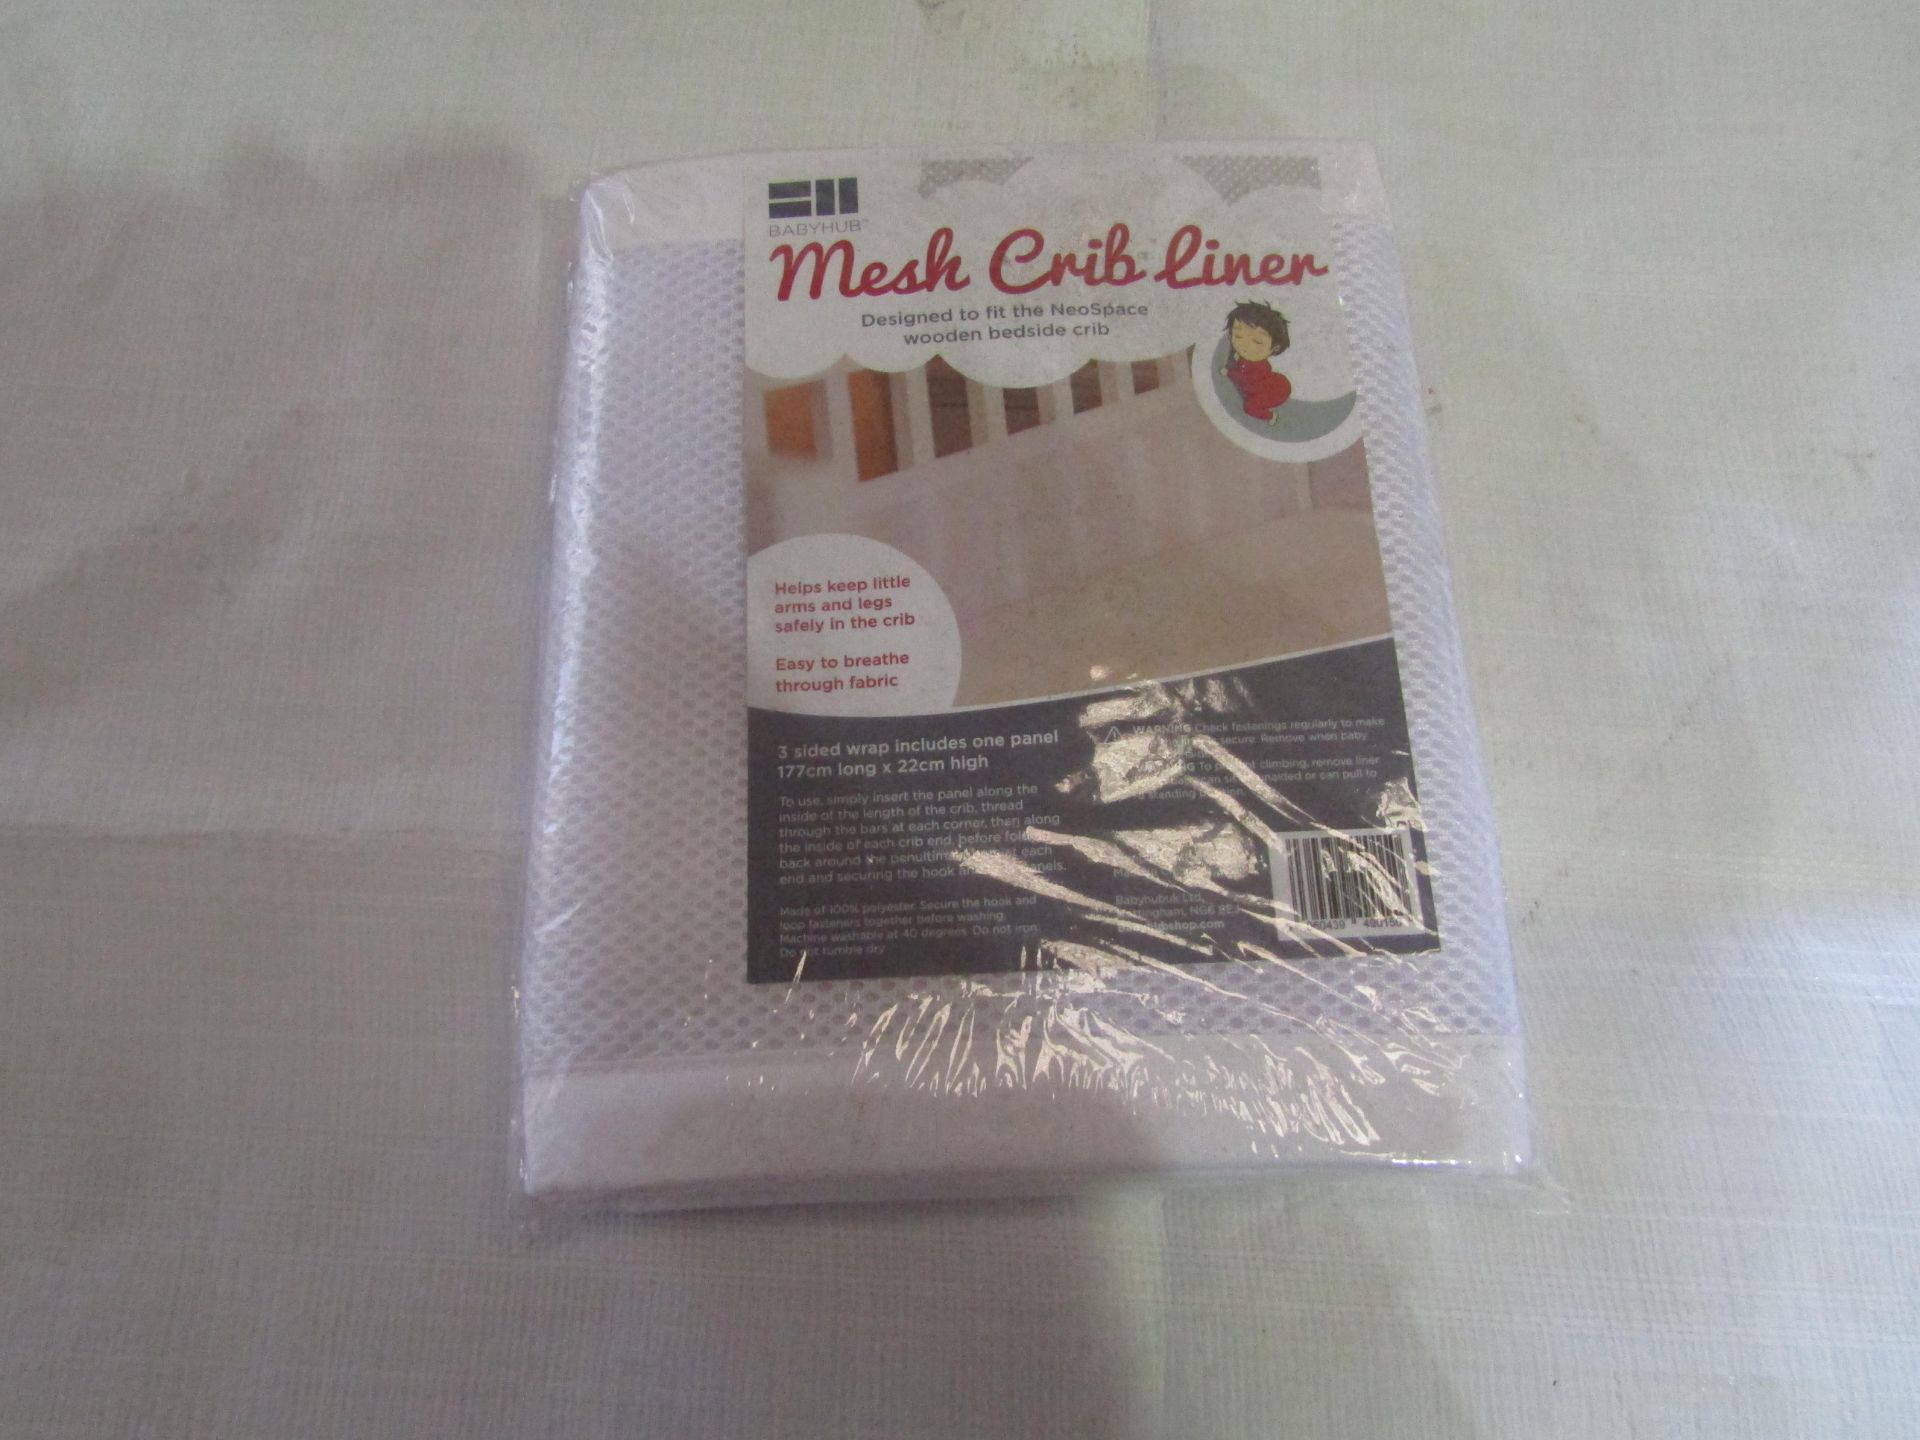 4x Baby Hub Mesh Crib Liner, 3 Sided Wrap Includes One Panel 177cm Long 22cm High - New & Packaged.